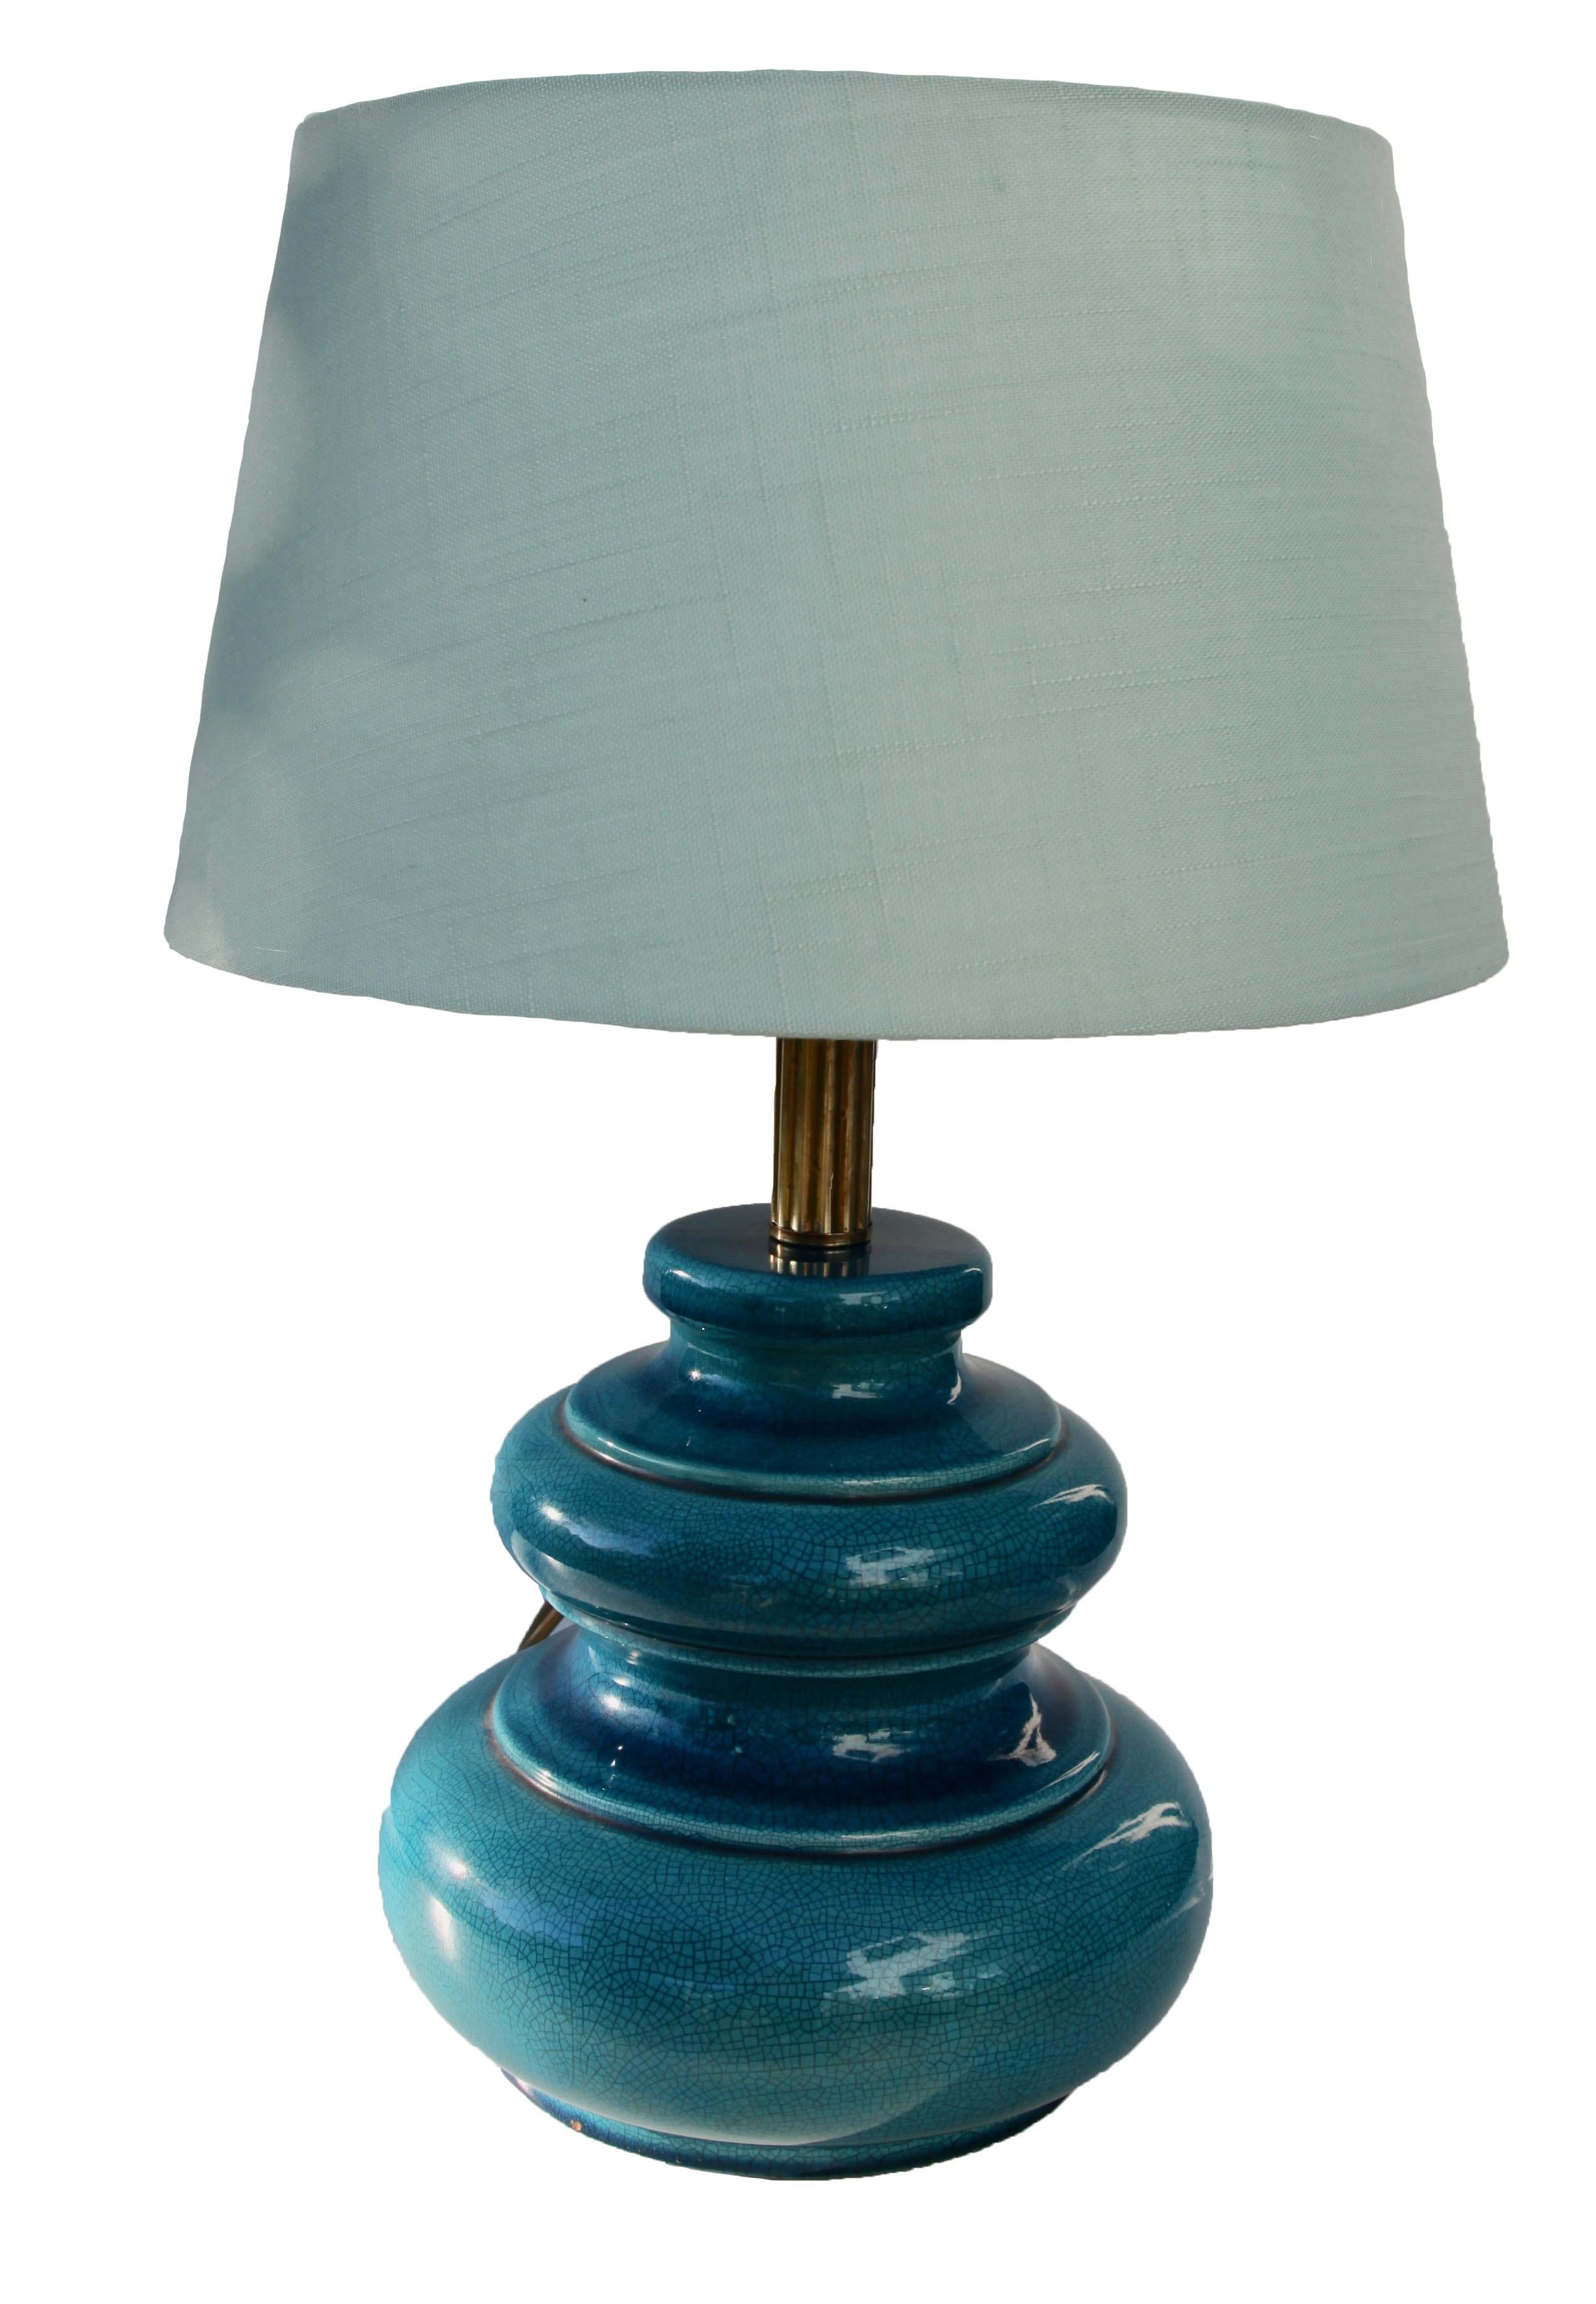 A turquoise celadon table lamp in the modernist Chinese style. Fine craquelure glaze in vibrant turquoise, on a molded base of white ceramic.

Inspired by a centuries-old technique of Chinese ceramics, this elegant table lamp is a darker tint of